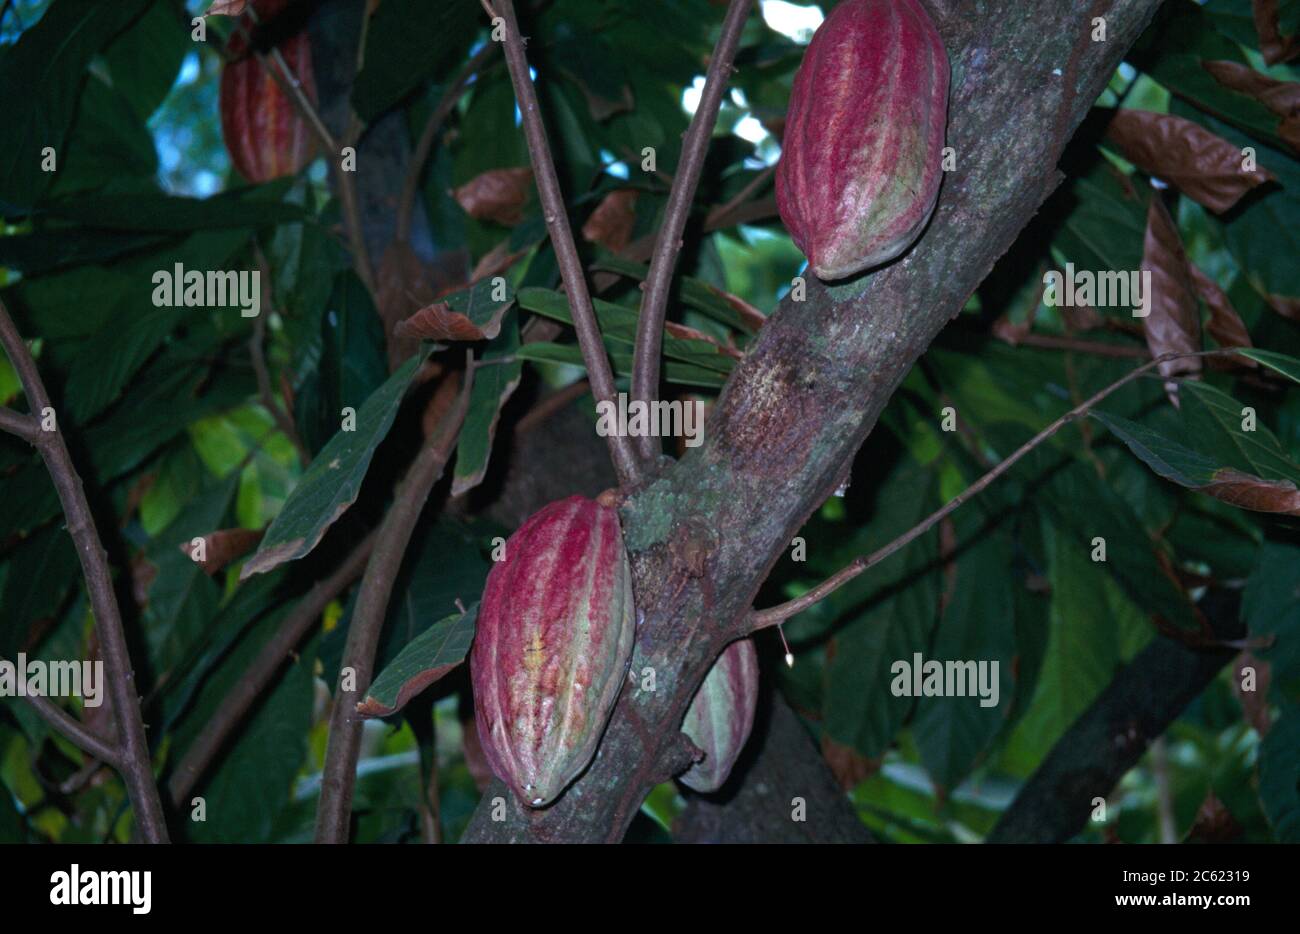 Tobago Trinidad Arnos Vale Cocoa Pods Growing On Tree In Rainforest Stock Photo